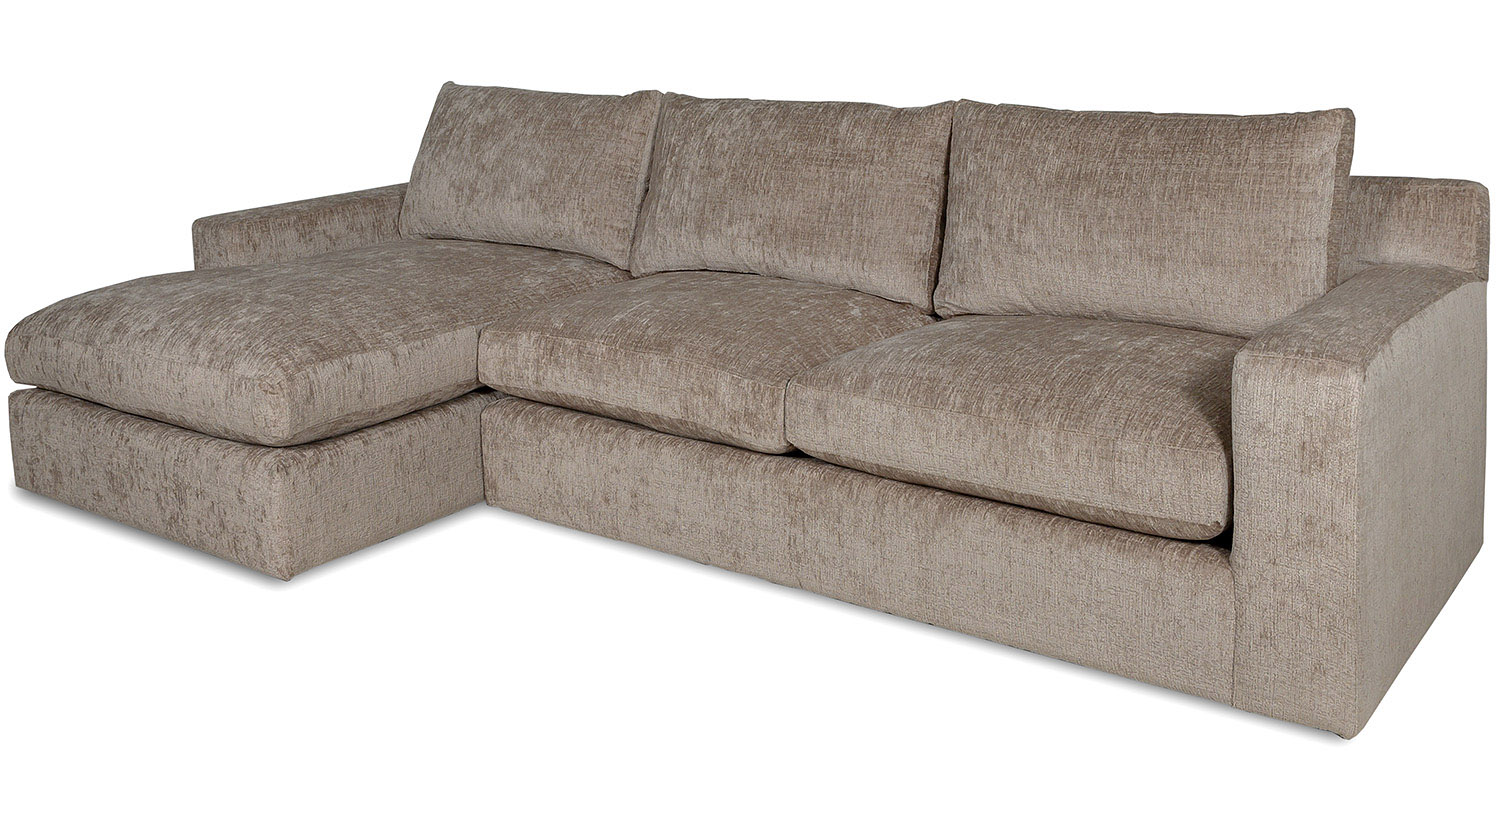 How Often To Replace Sofa